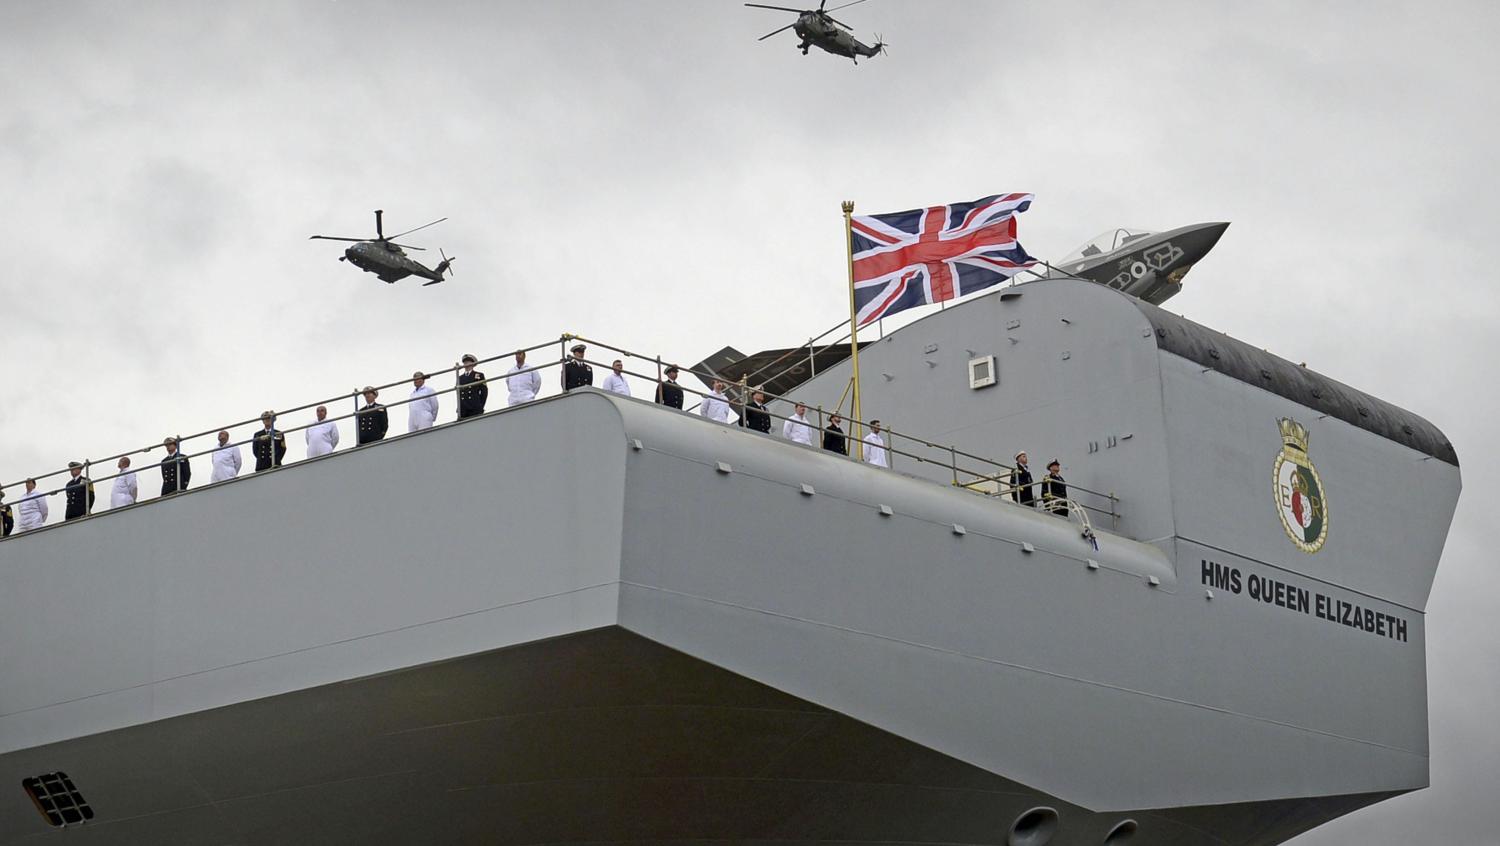 The naming ceremony for Britain's aircraft carrier HMS Queen Elizabeth (Photo: Ministry of Defence, UK)